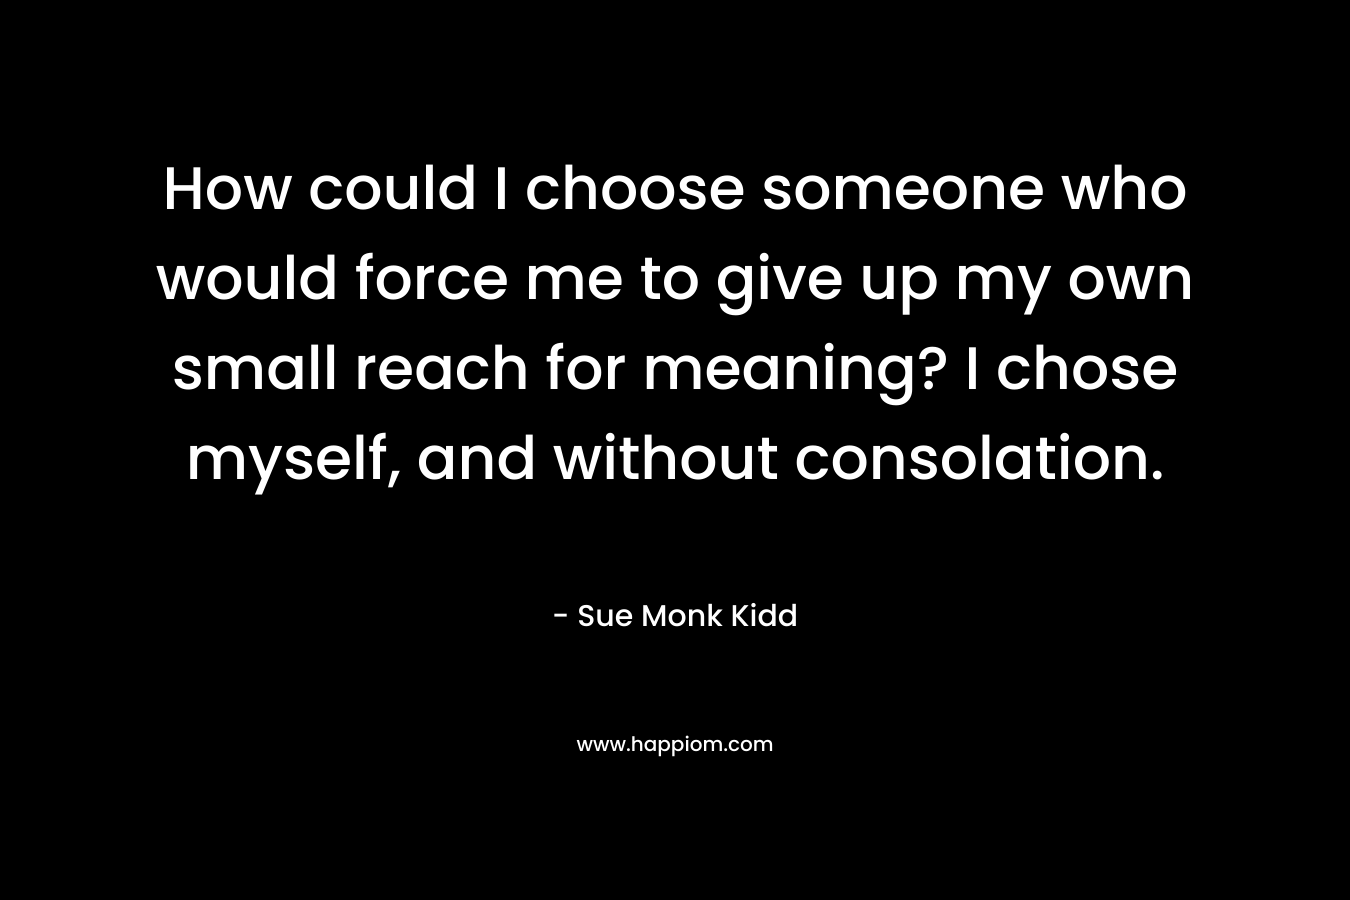 How could I choose someone who would force me to give up my own small reach for meaning? I chose myself, and without consolation.